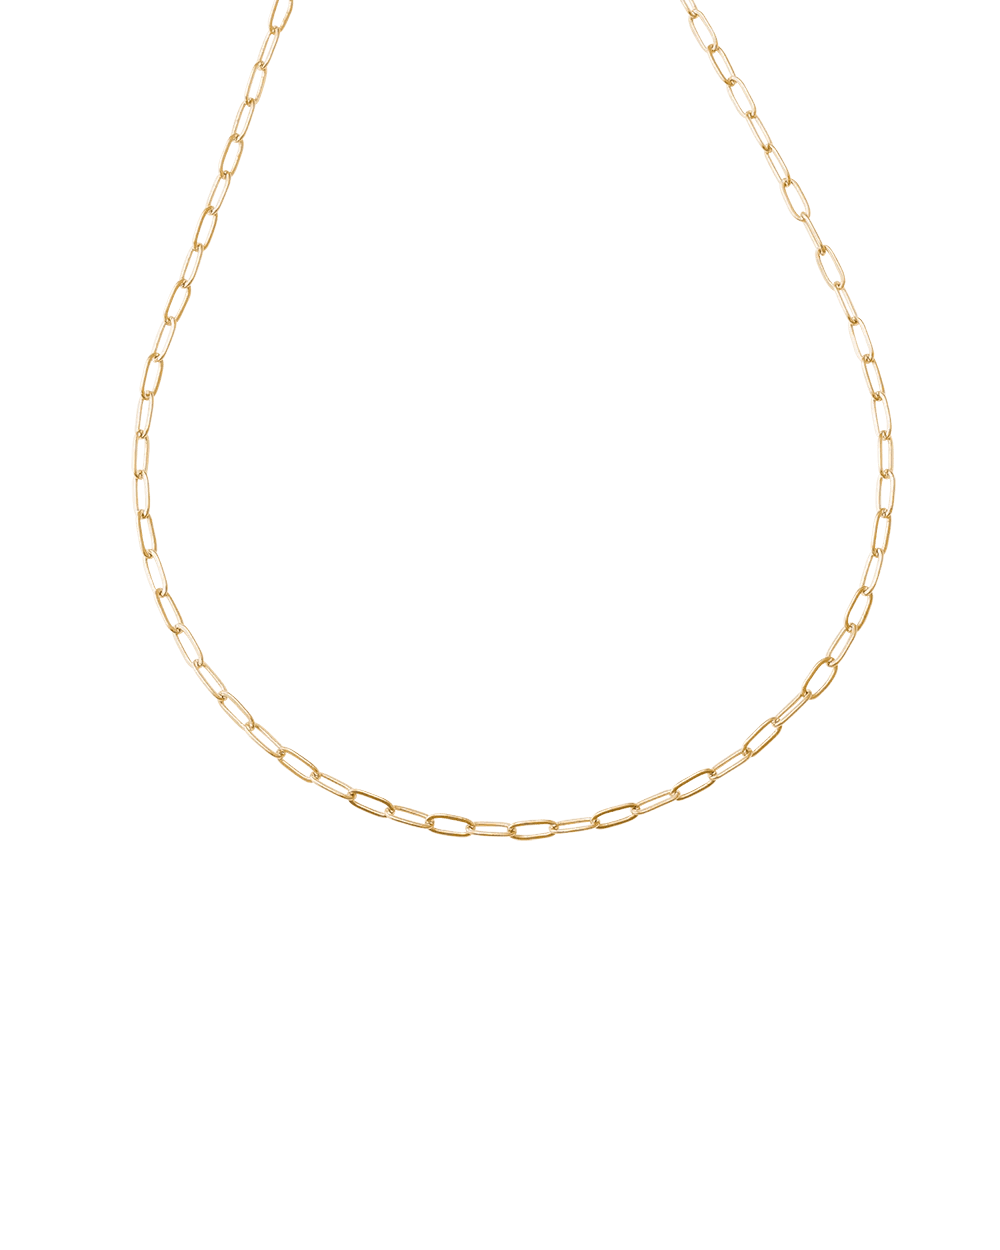 kirstin-ash-necklaces-yellow-gold-rue-chain-necklace-42725880496379